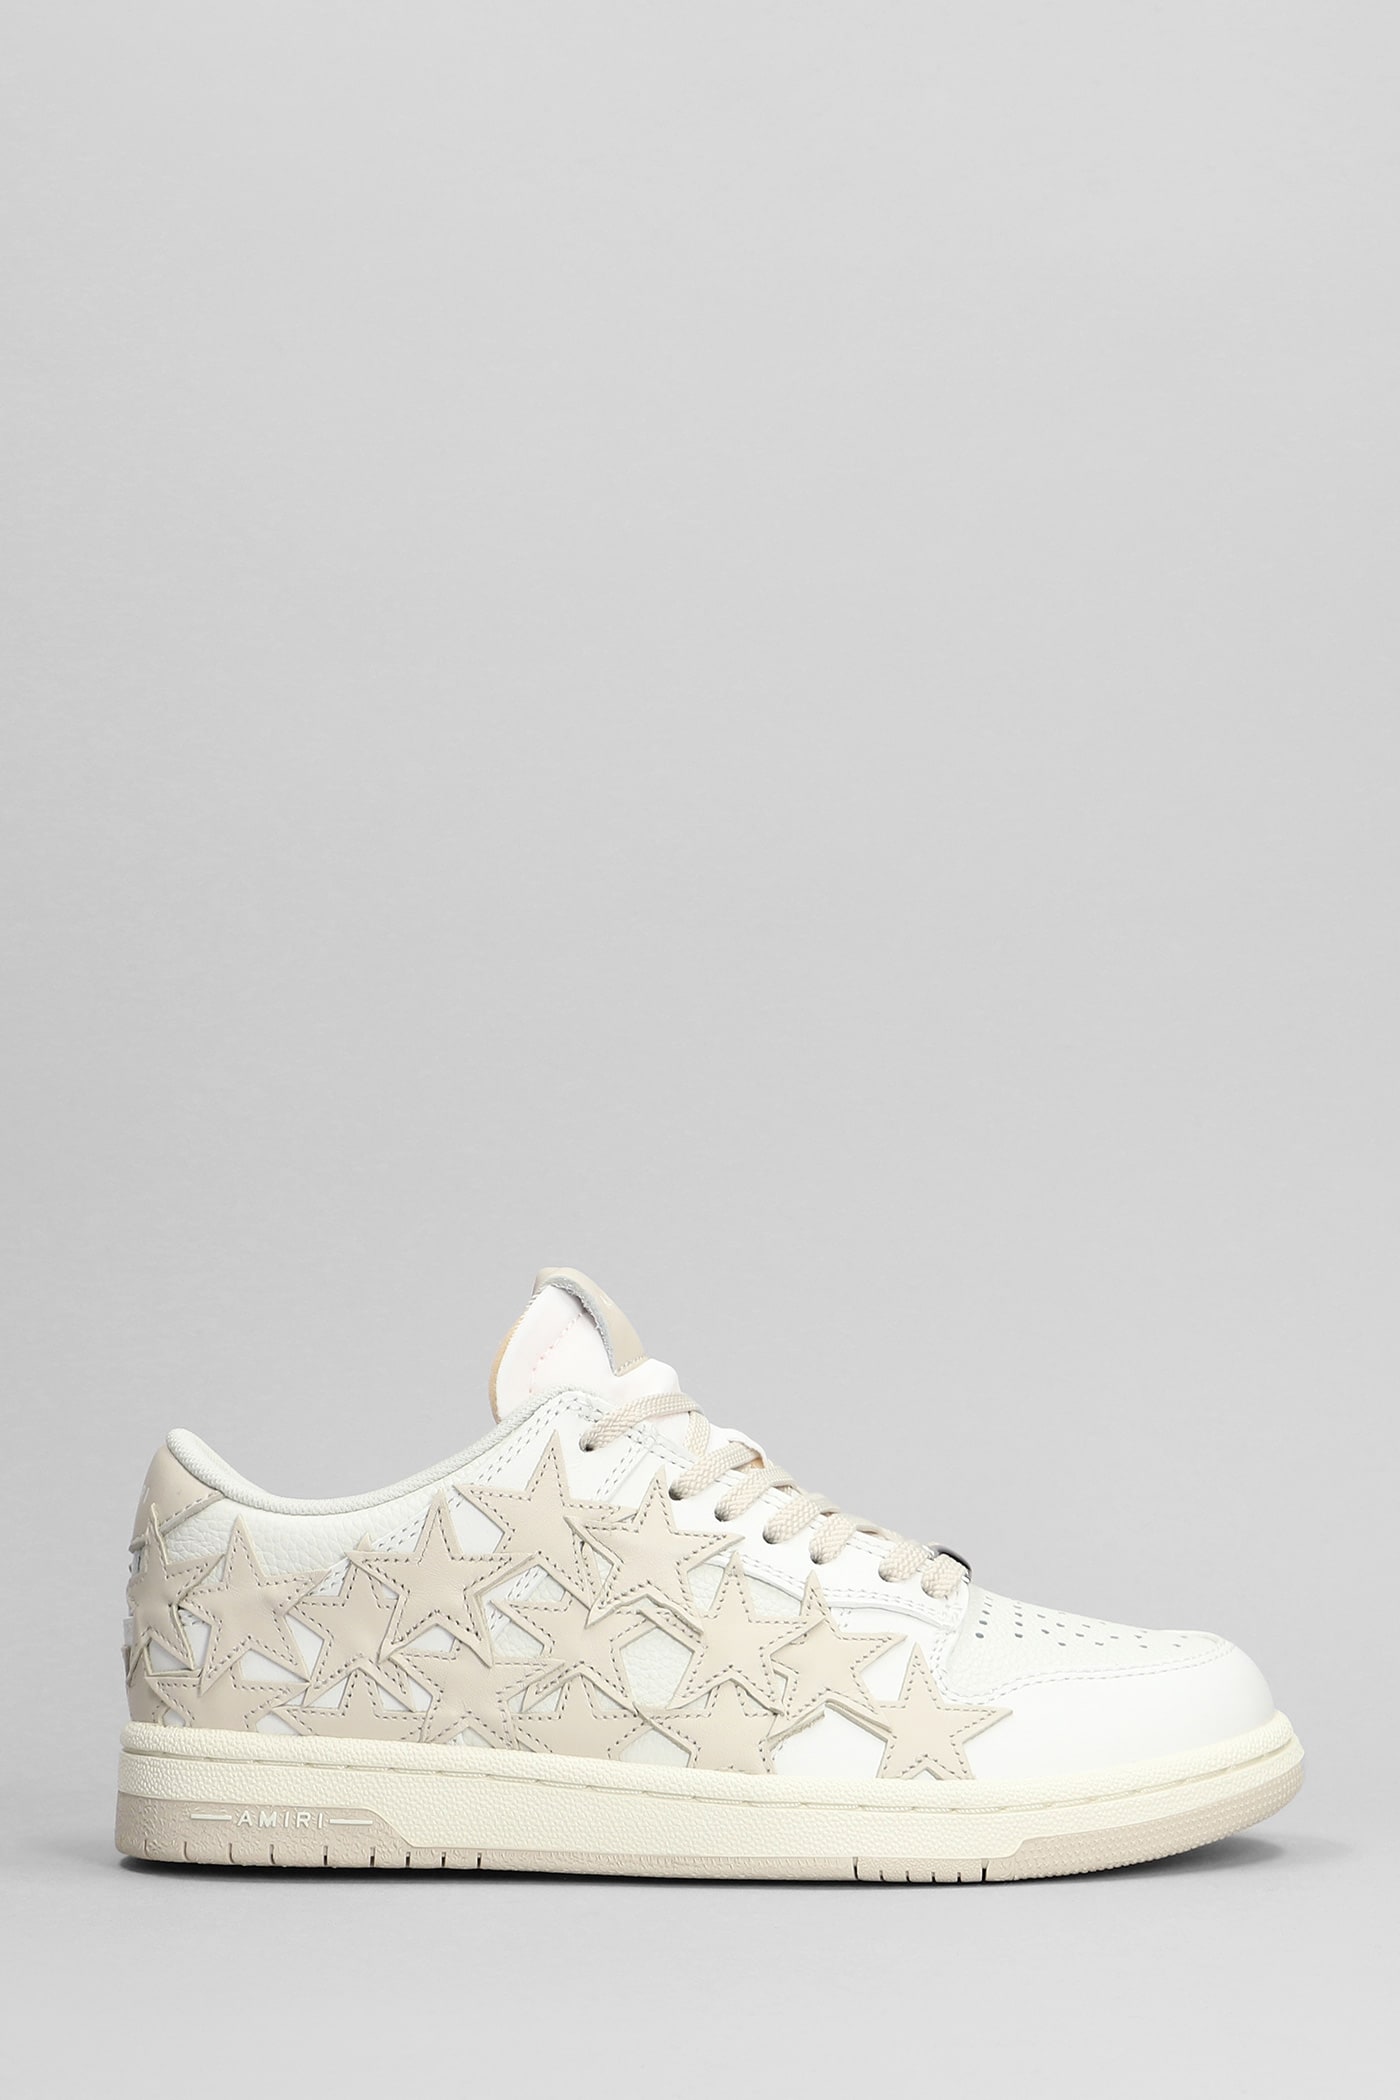 Amiri Stars Low Sneakers In White Leather